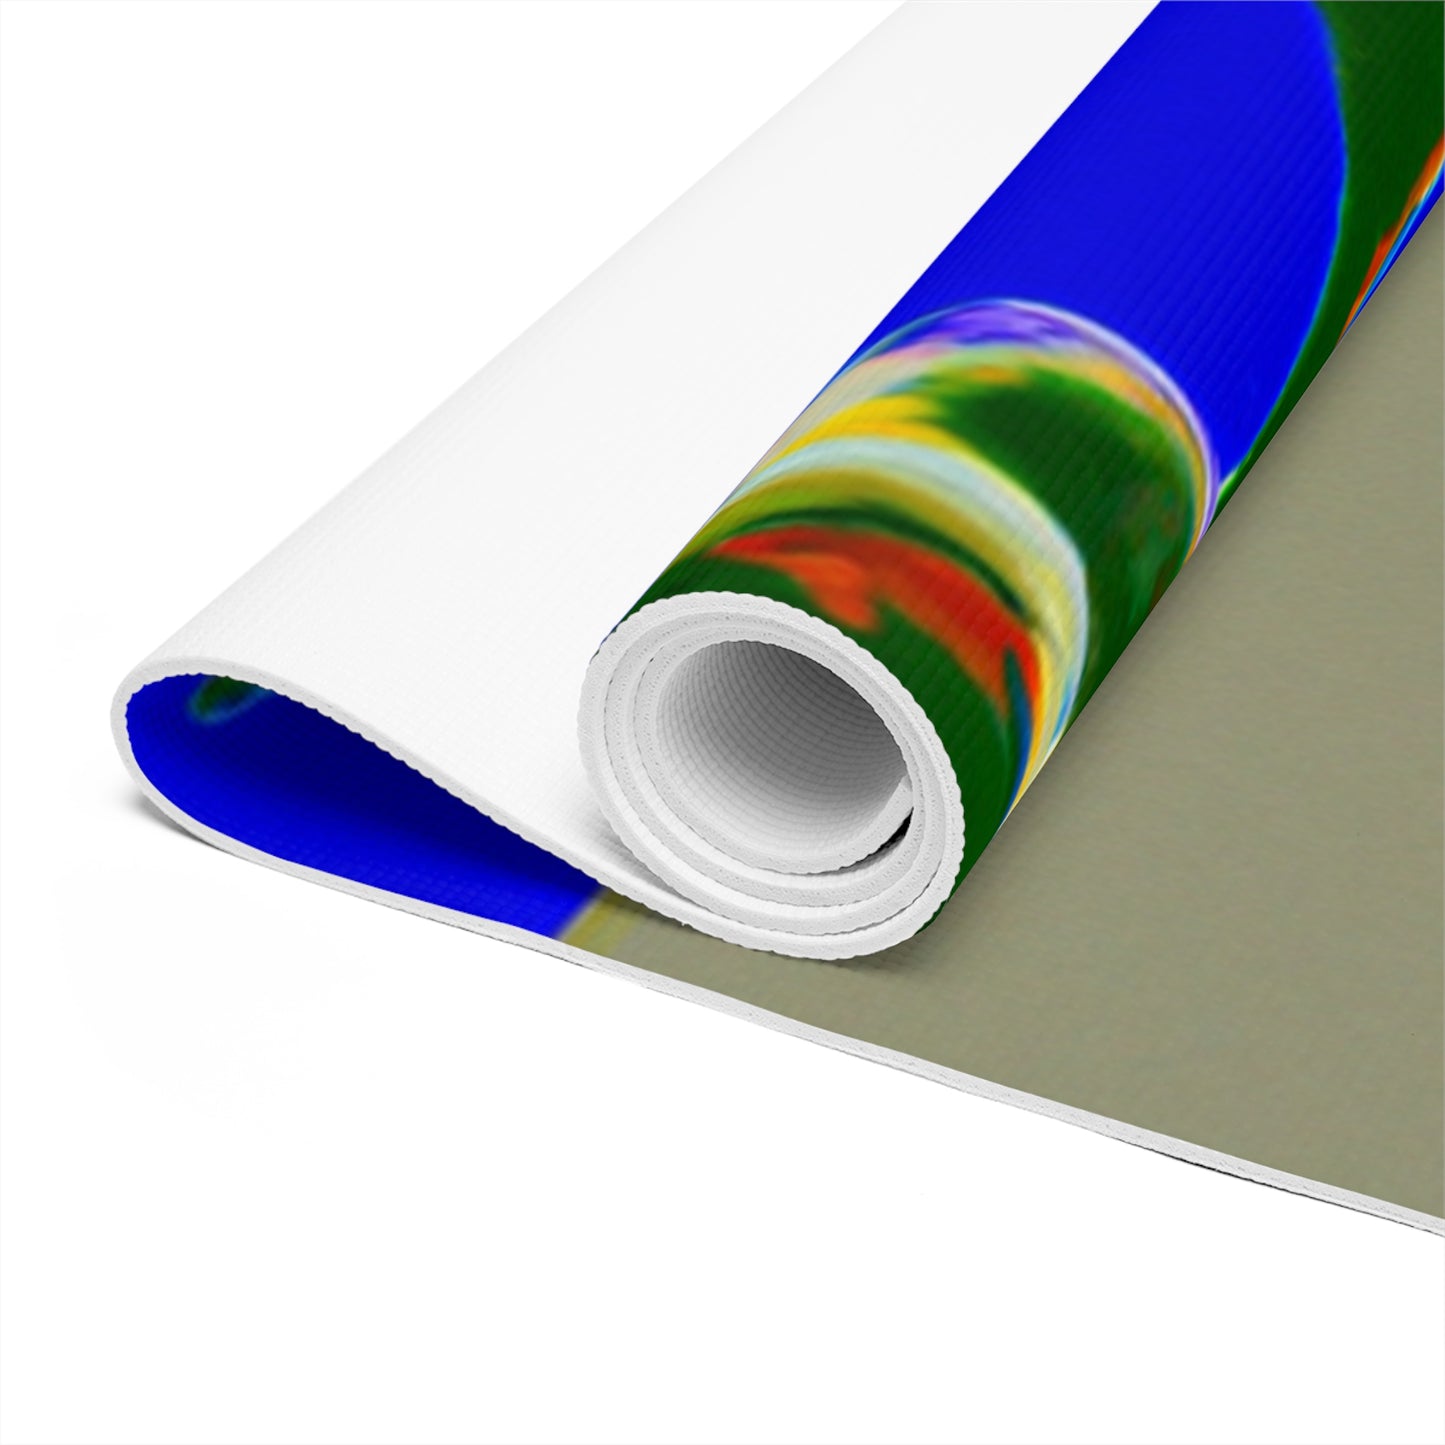 "The Moment in Motion: An Abstract Sports Image" - Go Plus Foam Yoga Mat